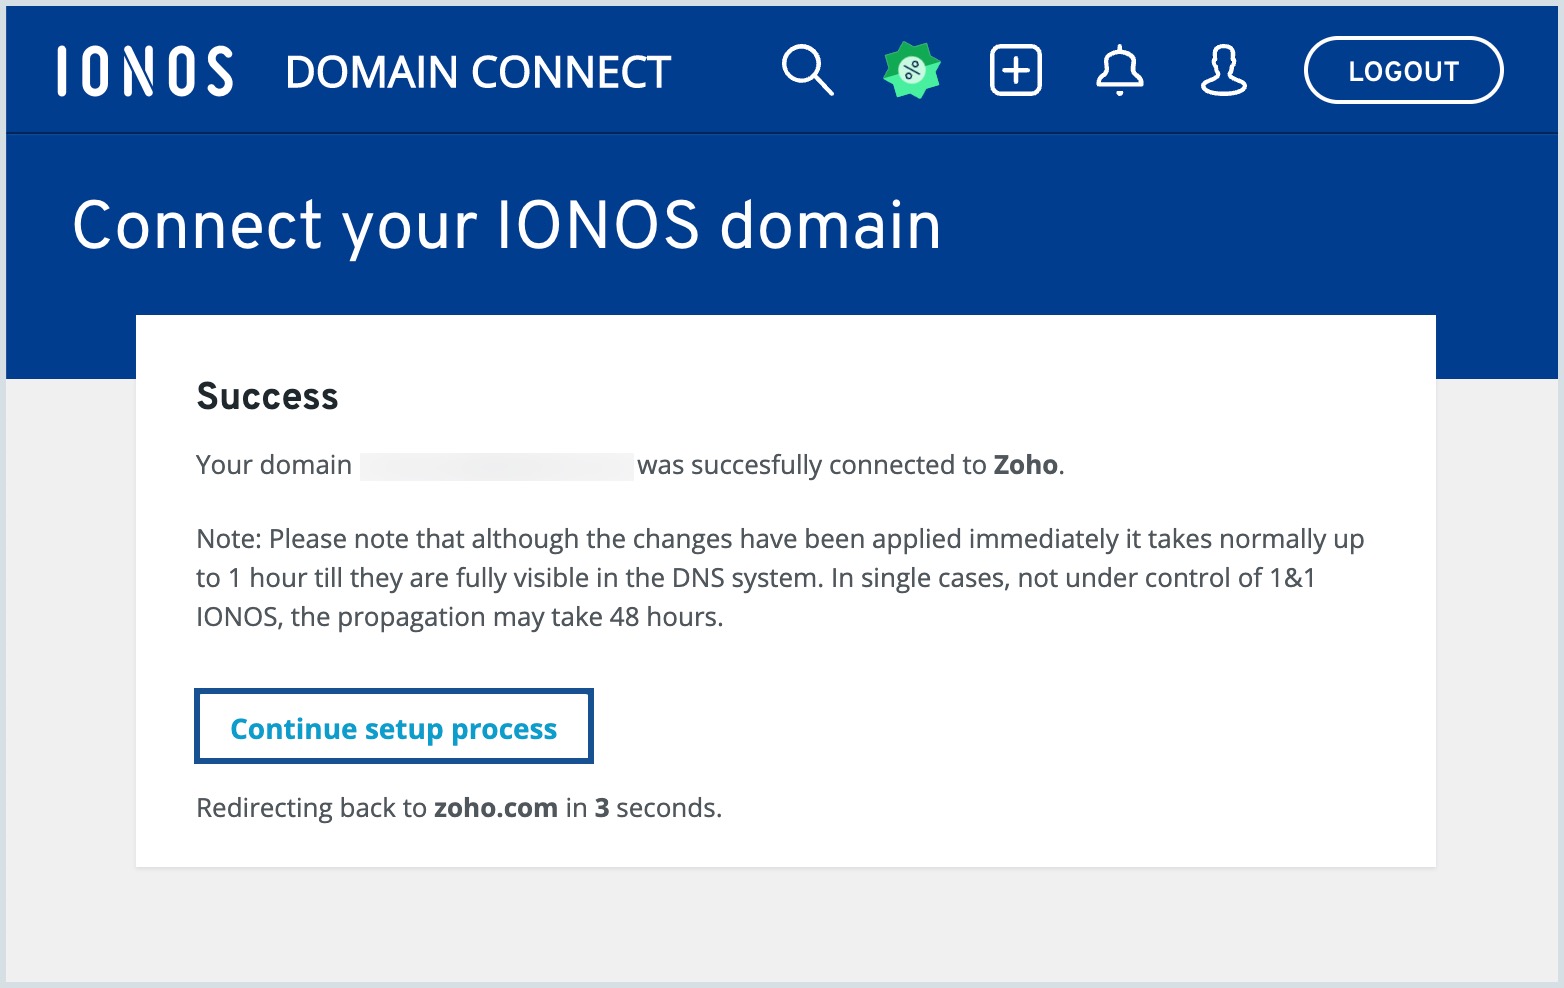 Domain Connect complete